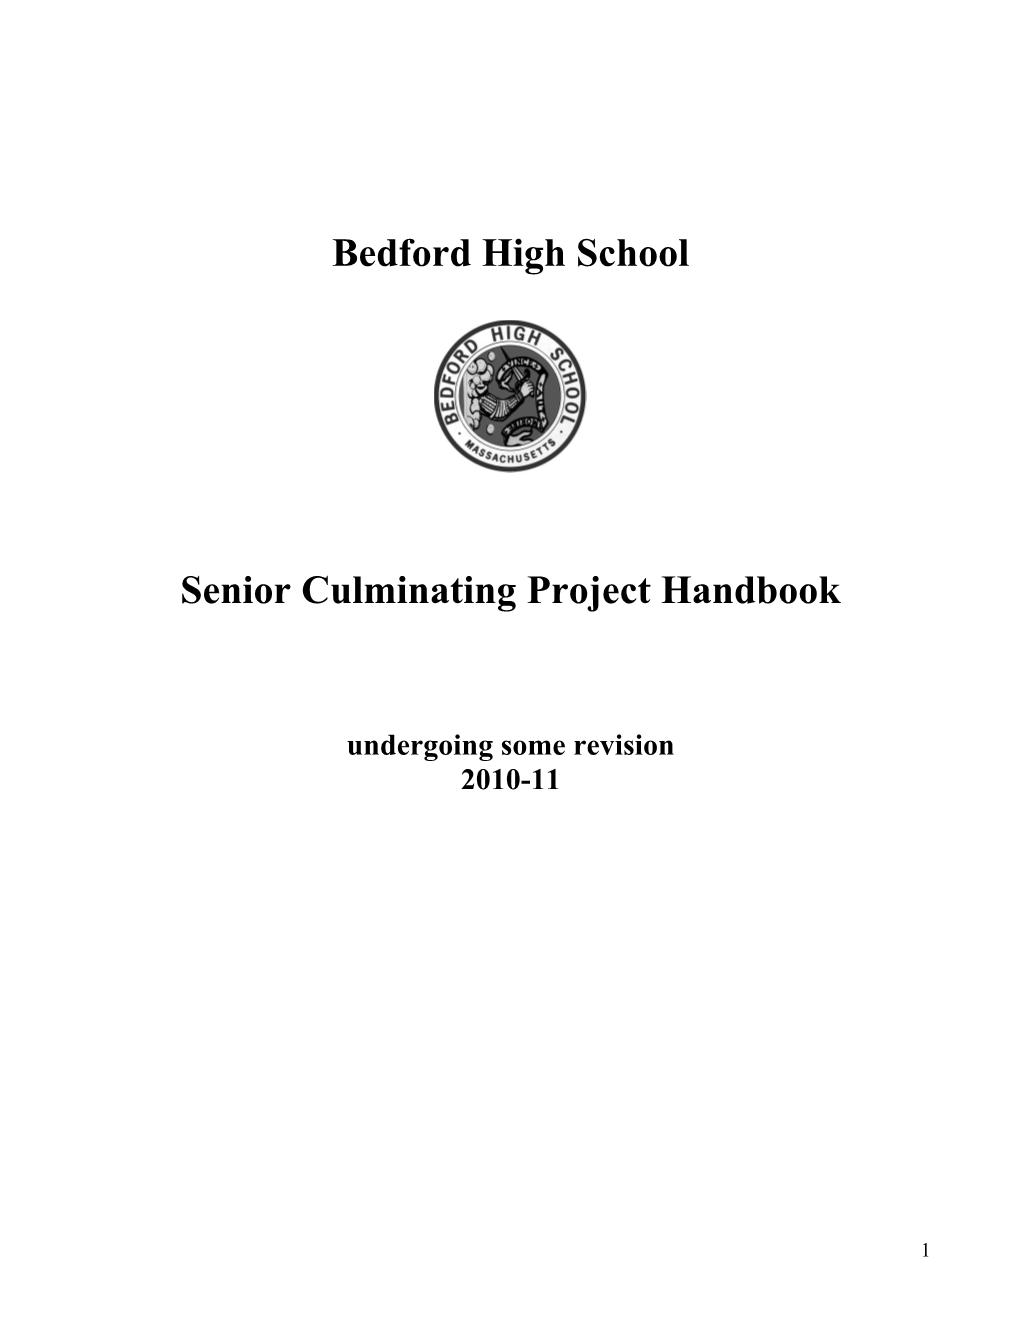 Components of the Senior Culminating Project in Brief